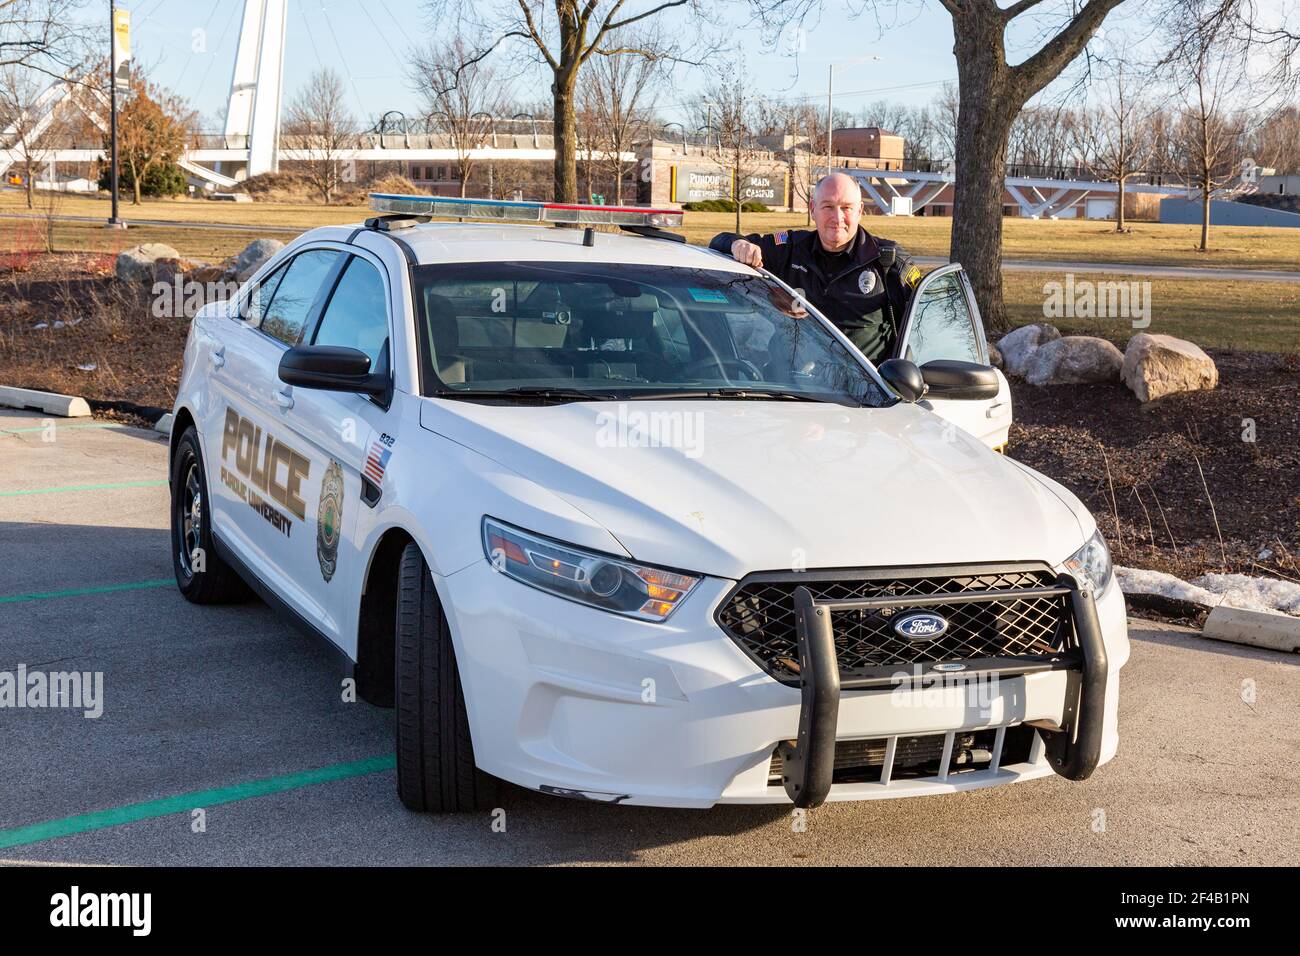 A Purdue University Fort Wayne police officer stands next to a white patrol car on campus. Stock Photo